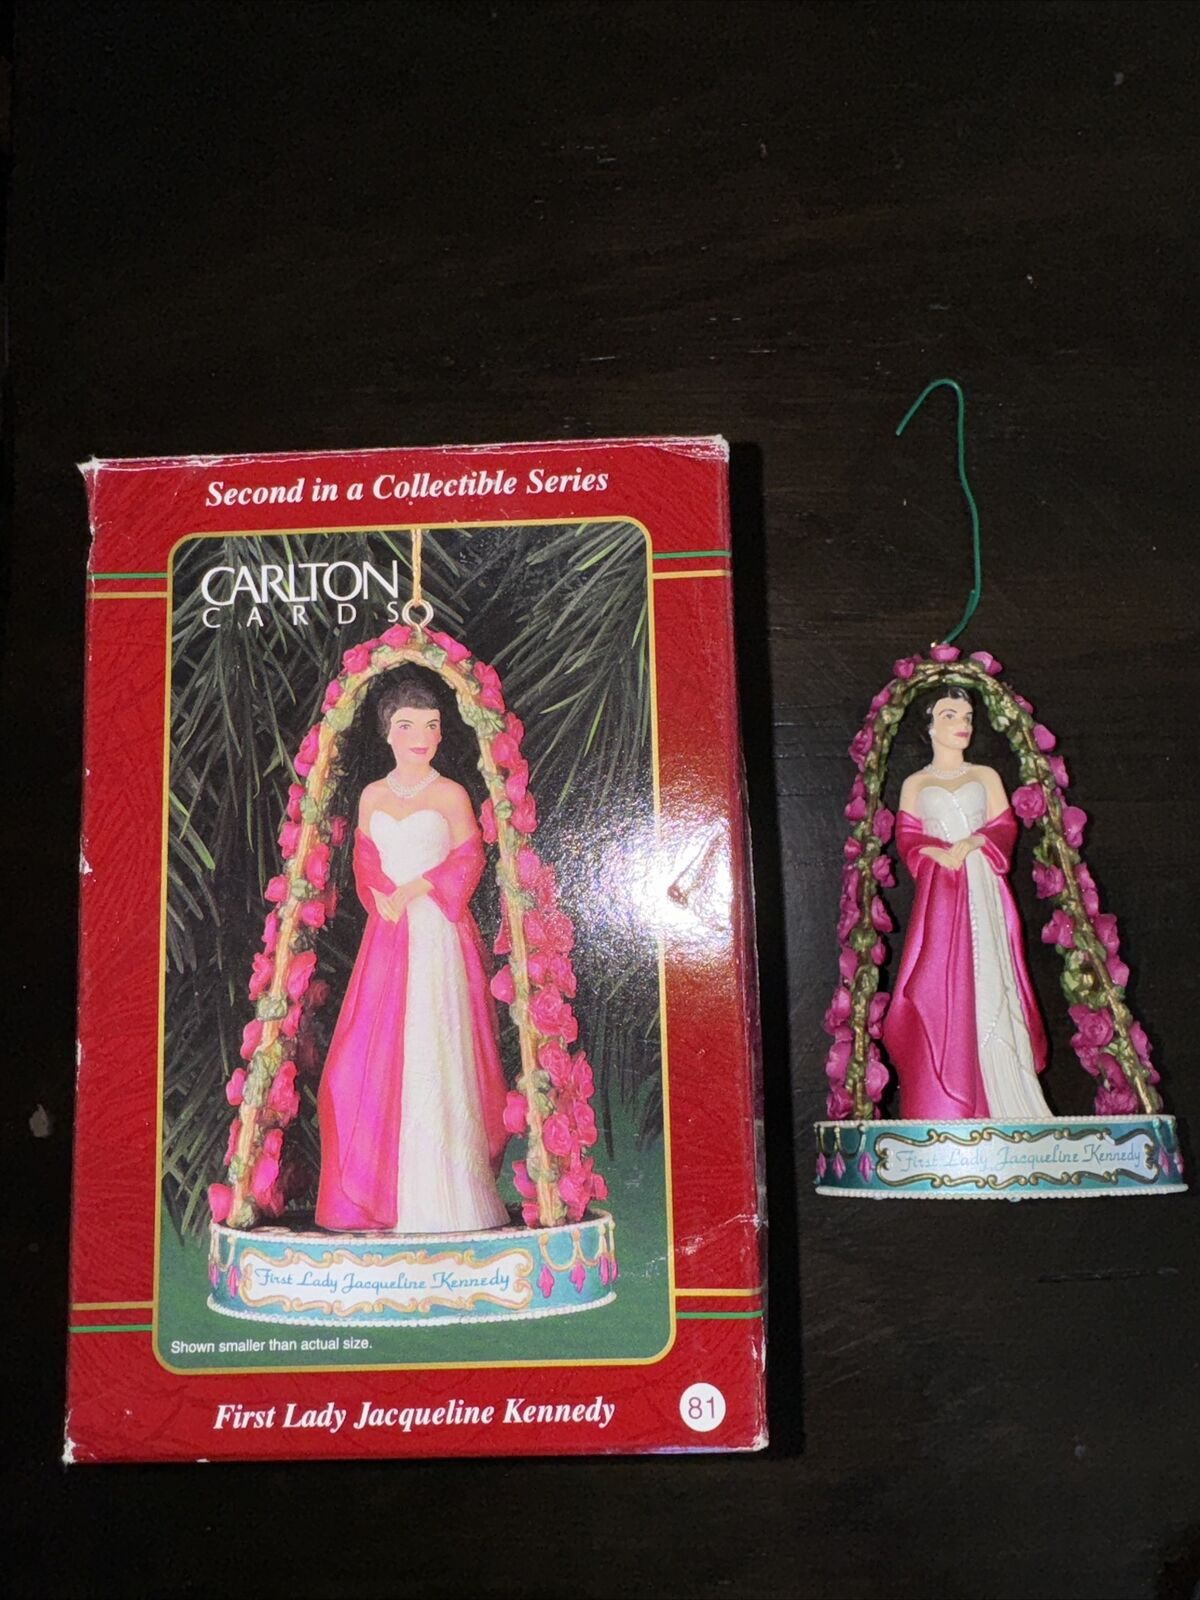 Carlton Cards First Lady Jacqueline Kennedy 2nd in a Collectible Series Ornament